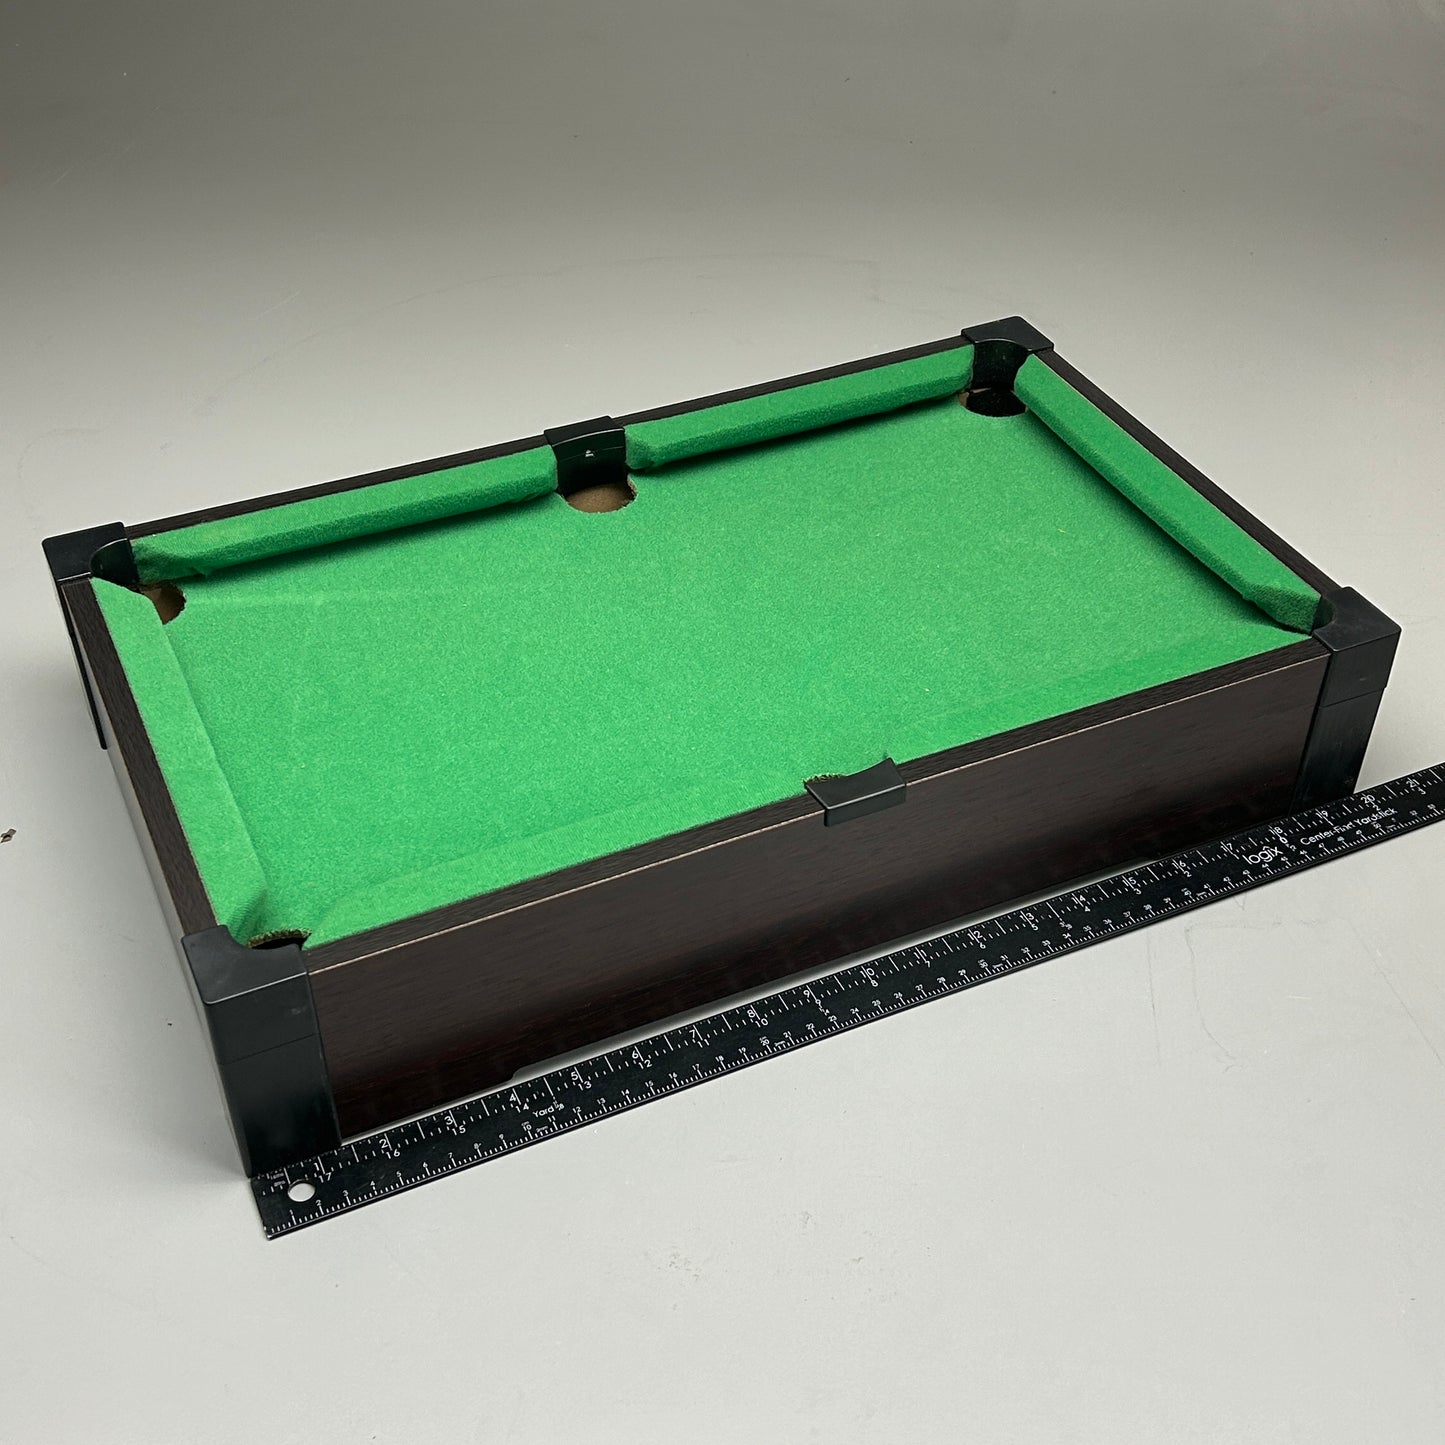 DAVE & BUSTER'S Miniature Pool Table 20 inch Billiards 14326 (New)